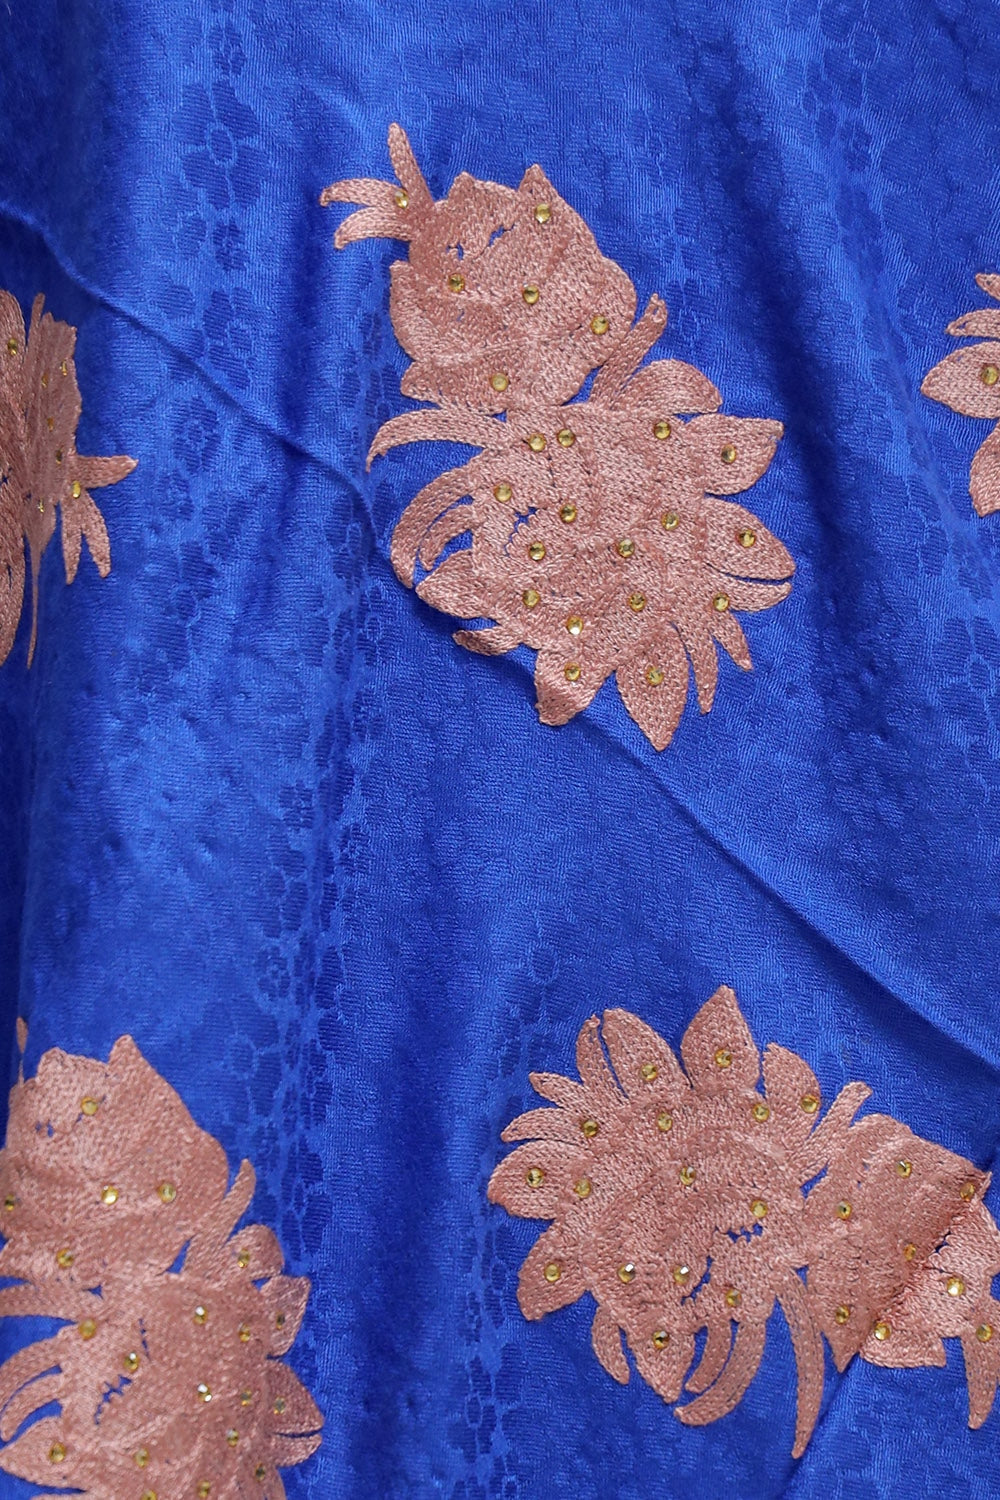 Royal Blue Colour Stole Enriched With Aari Embroidery